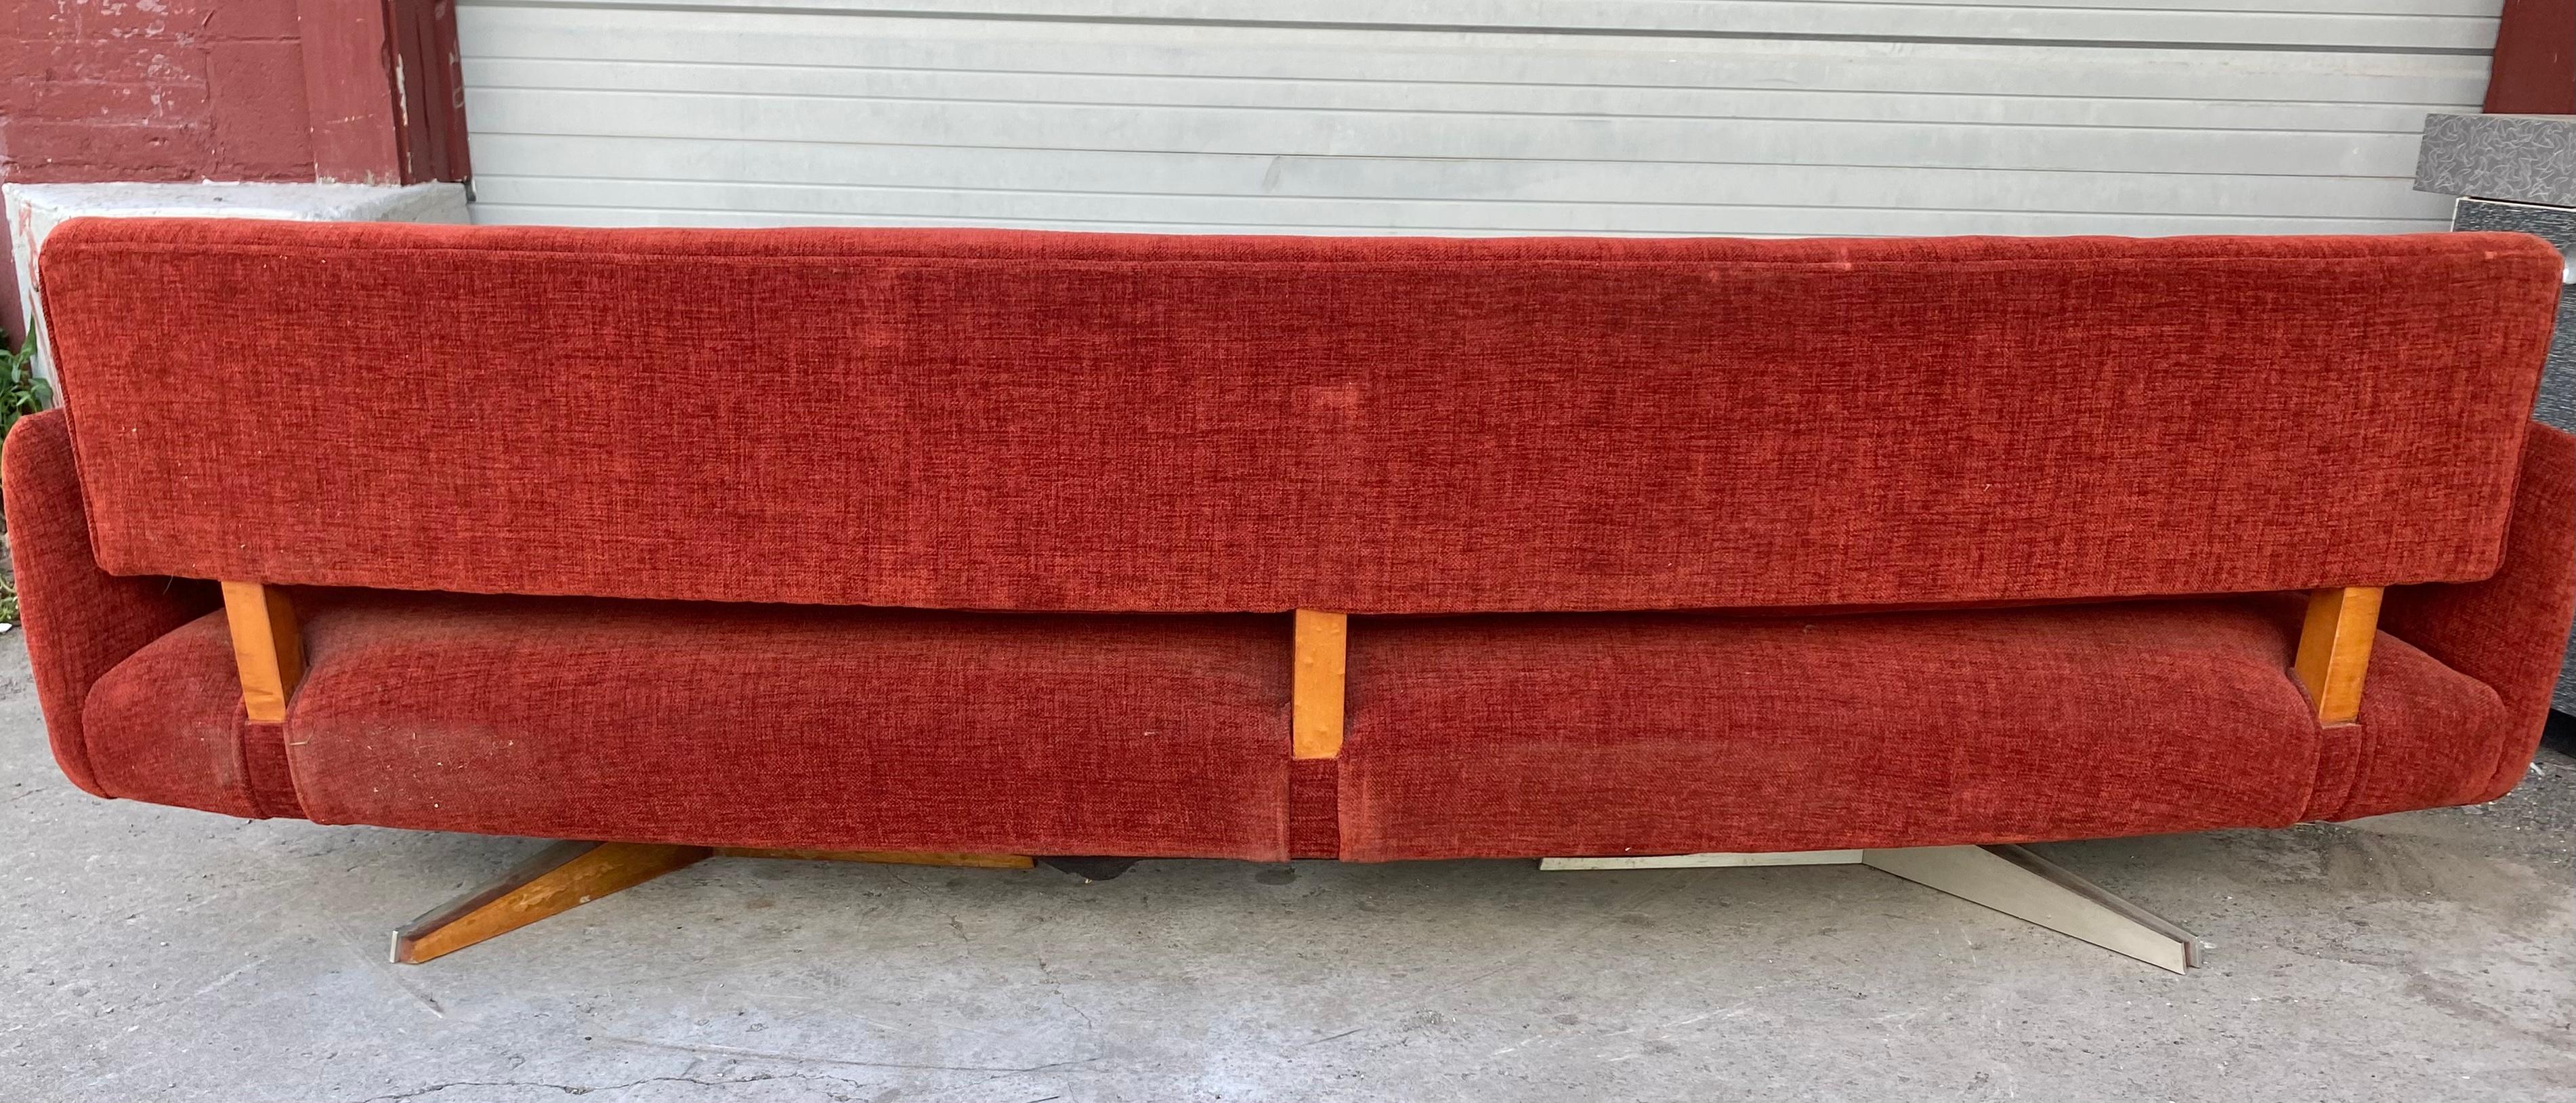 Stunning Mid Century Modern Sofa attributed to Jens Risom For Sale 2